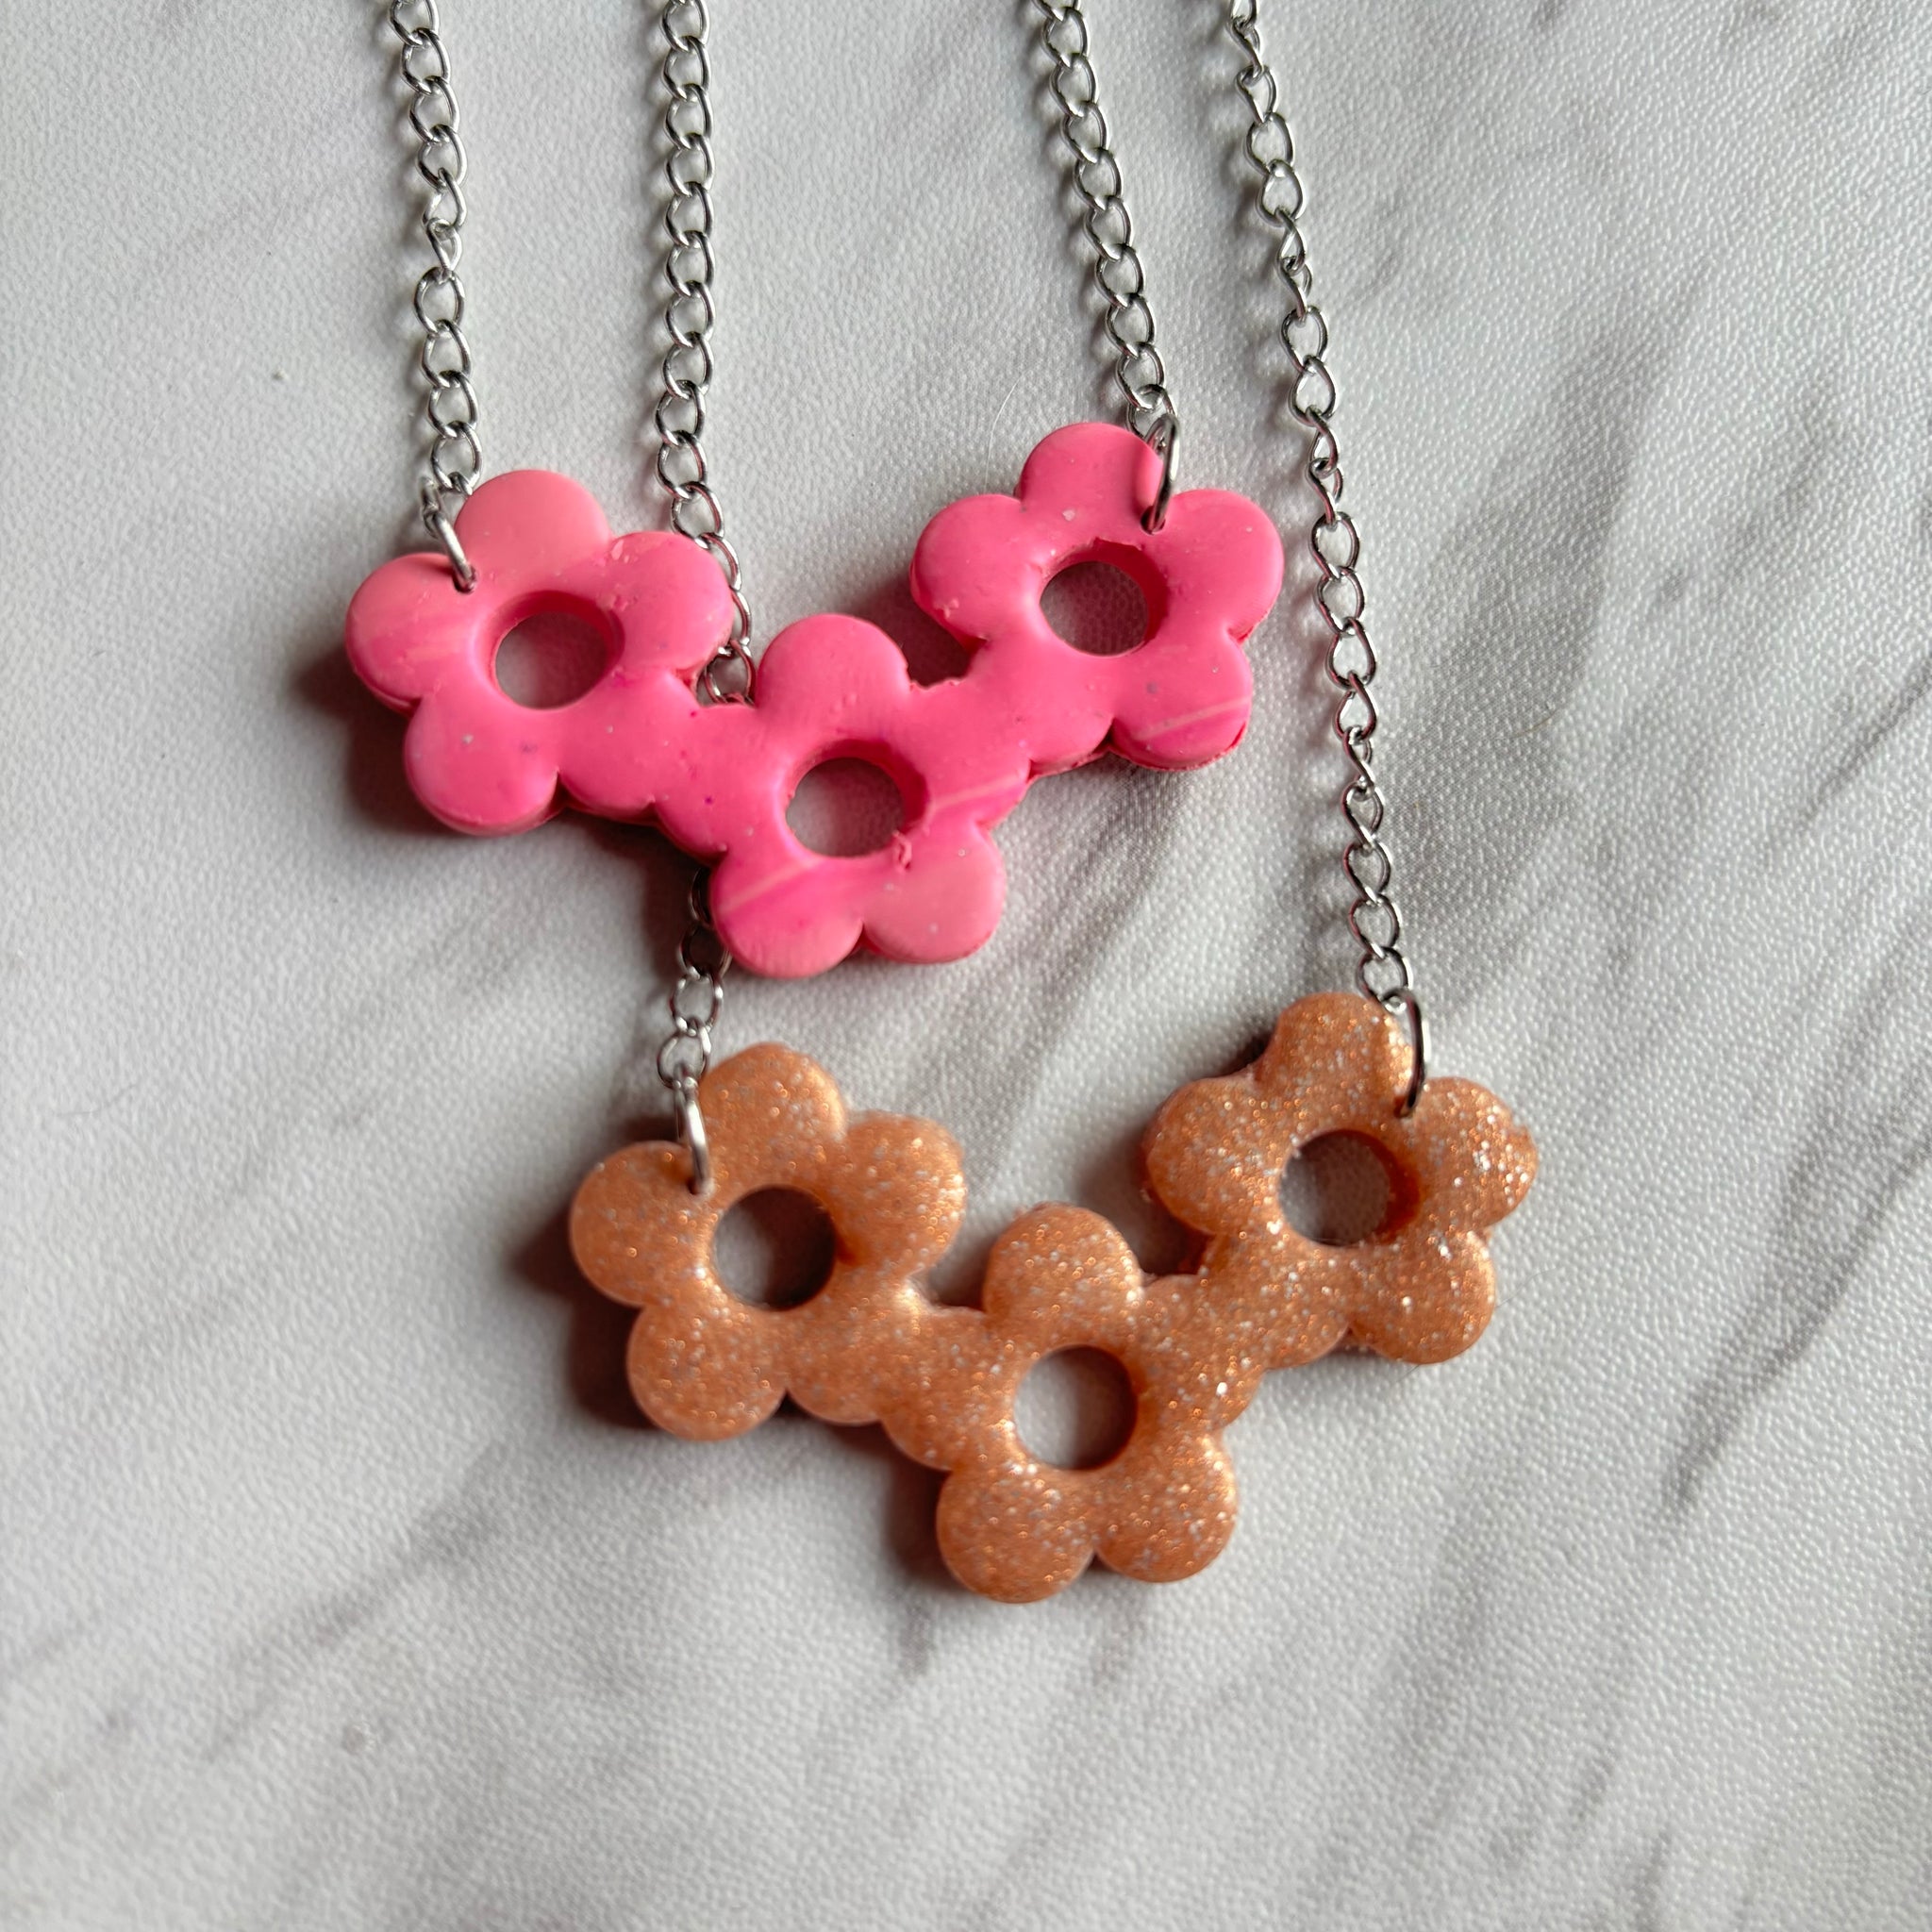 Assorted Clay Necklaces